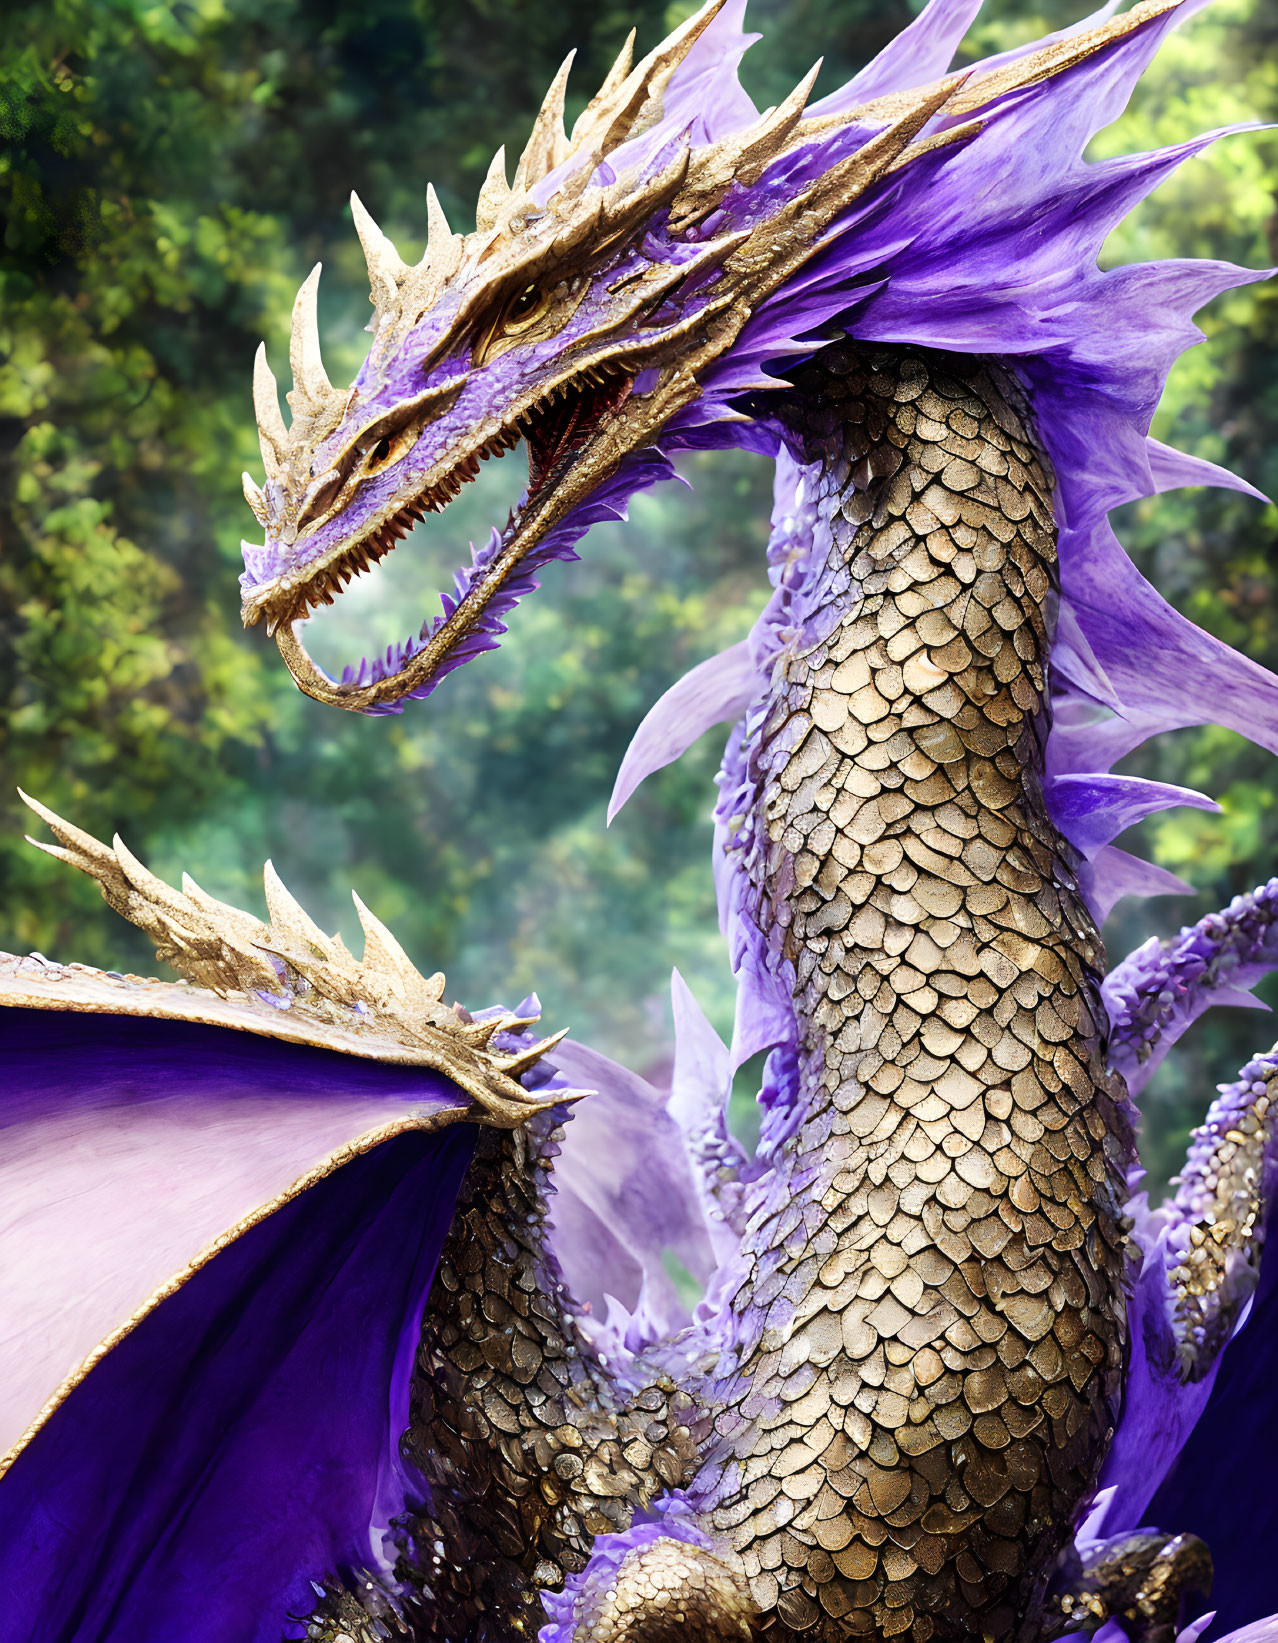 Purple Dragon with Golden Horns and Large Wings in Lush Green Setting